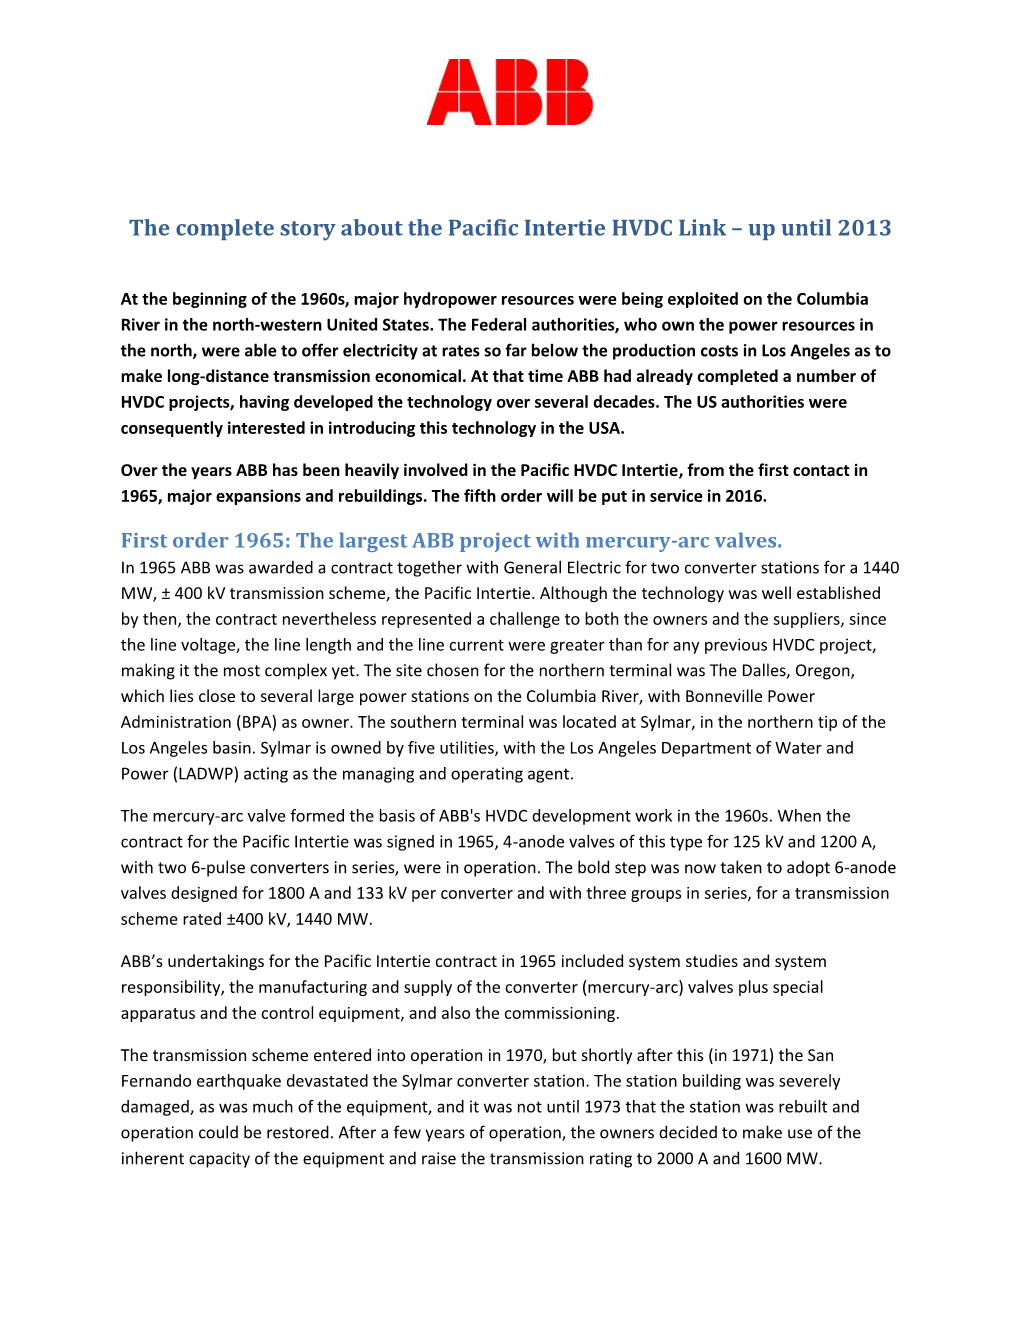 The Complete Story About the Pacific Intertie HVDC Link – up Until 2013